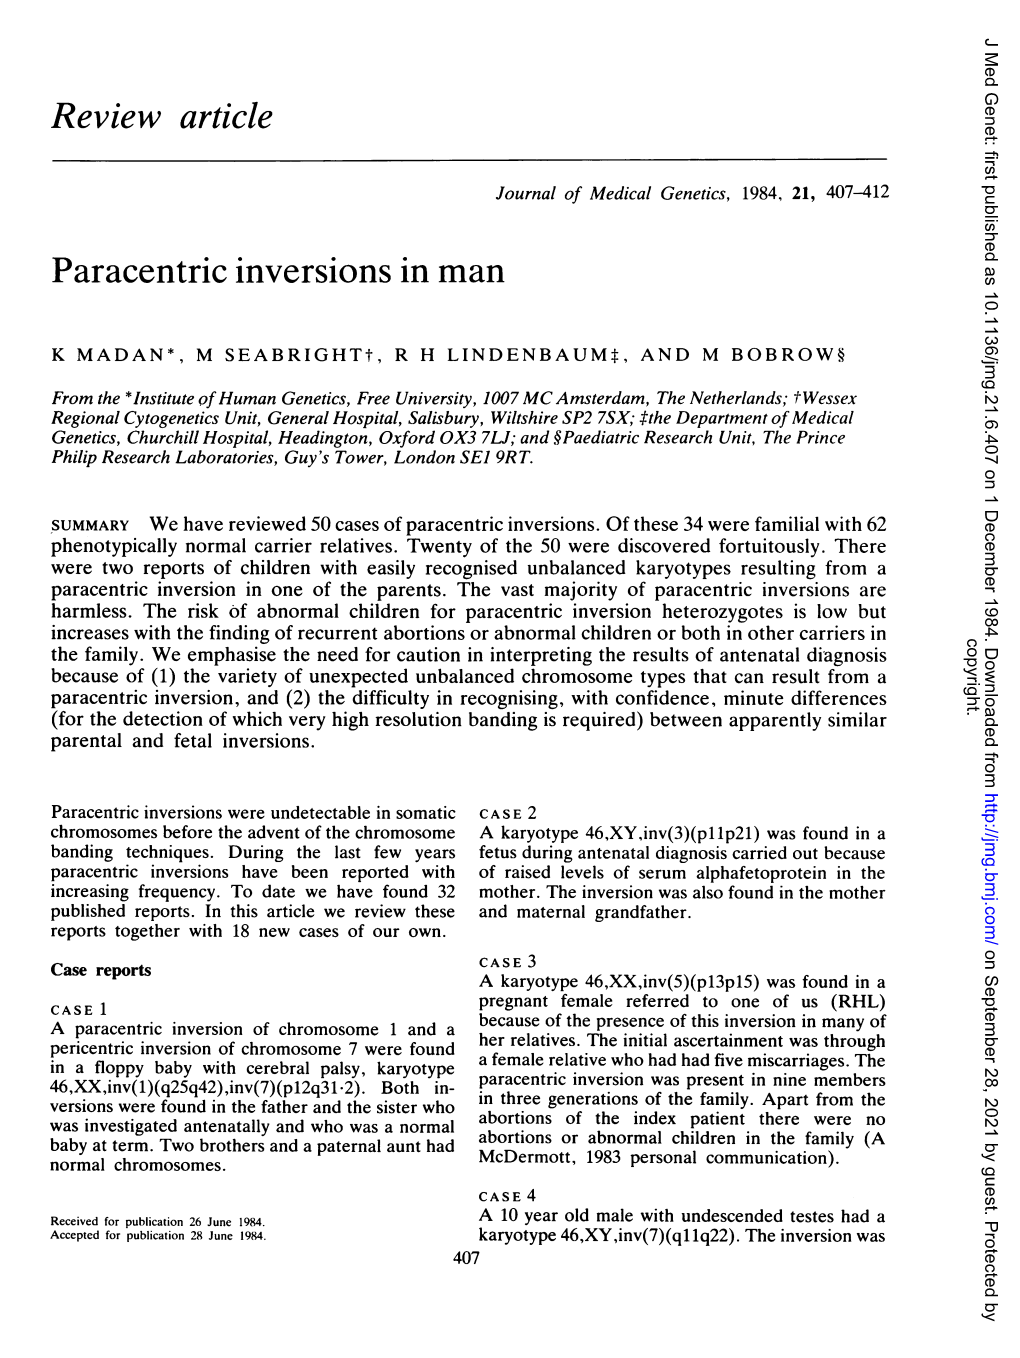 Paracentric Inversions in Man